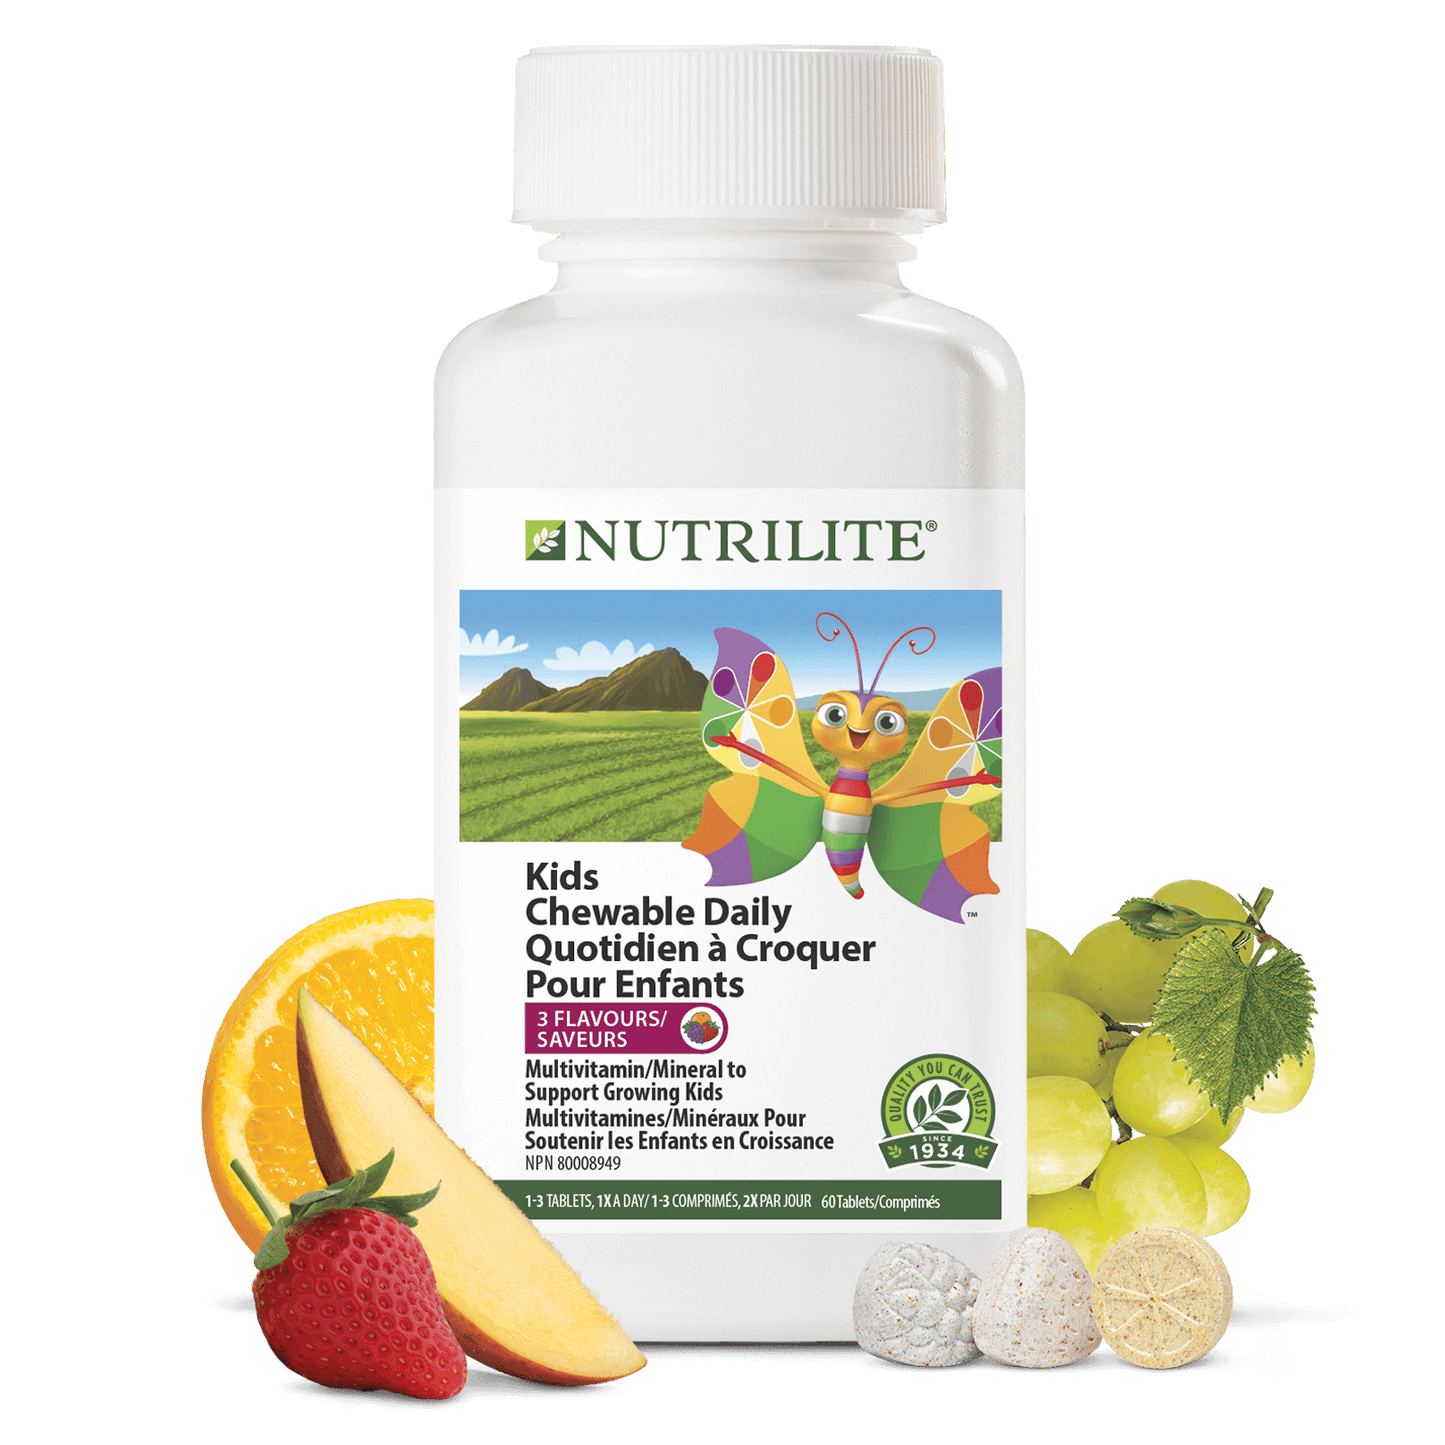 Amway Nutrilite™ Kids Chewable Daily NEW